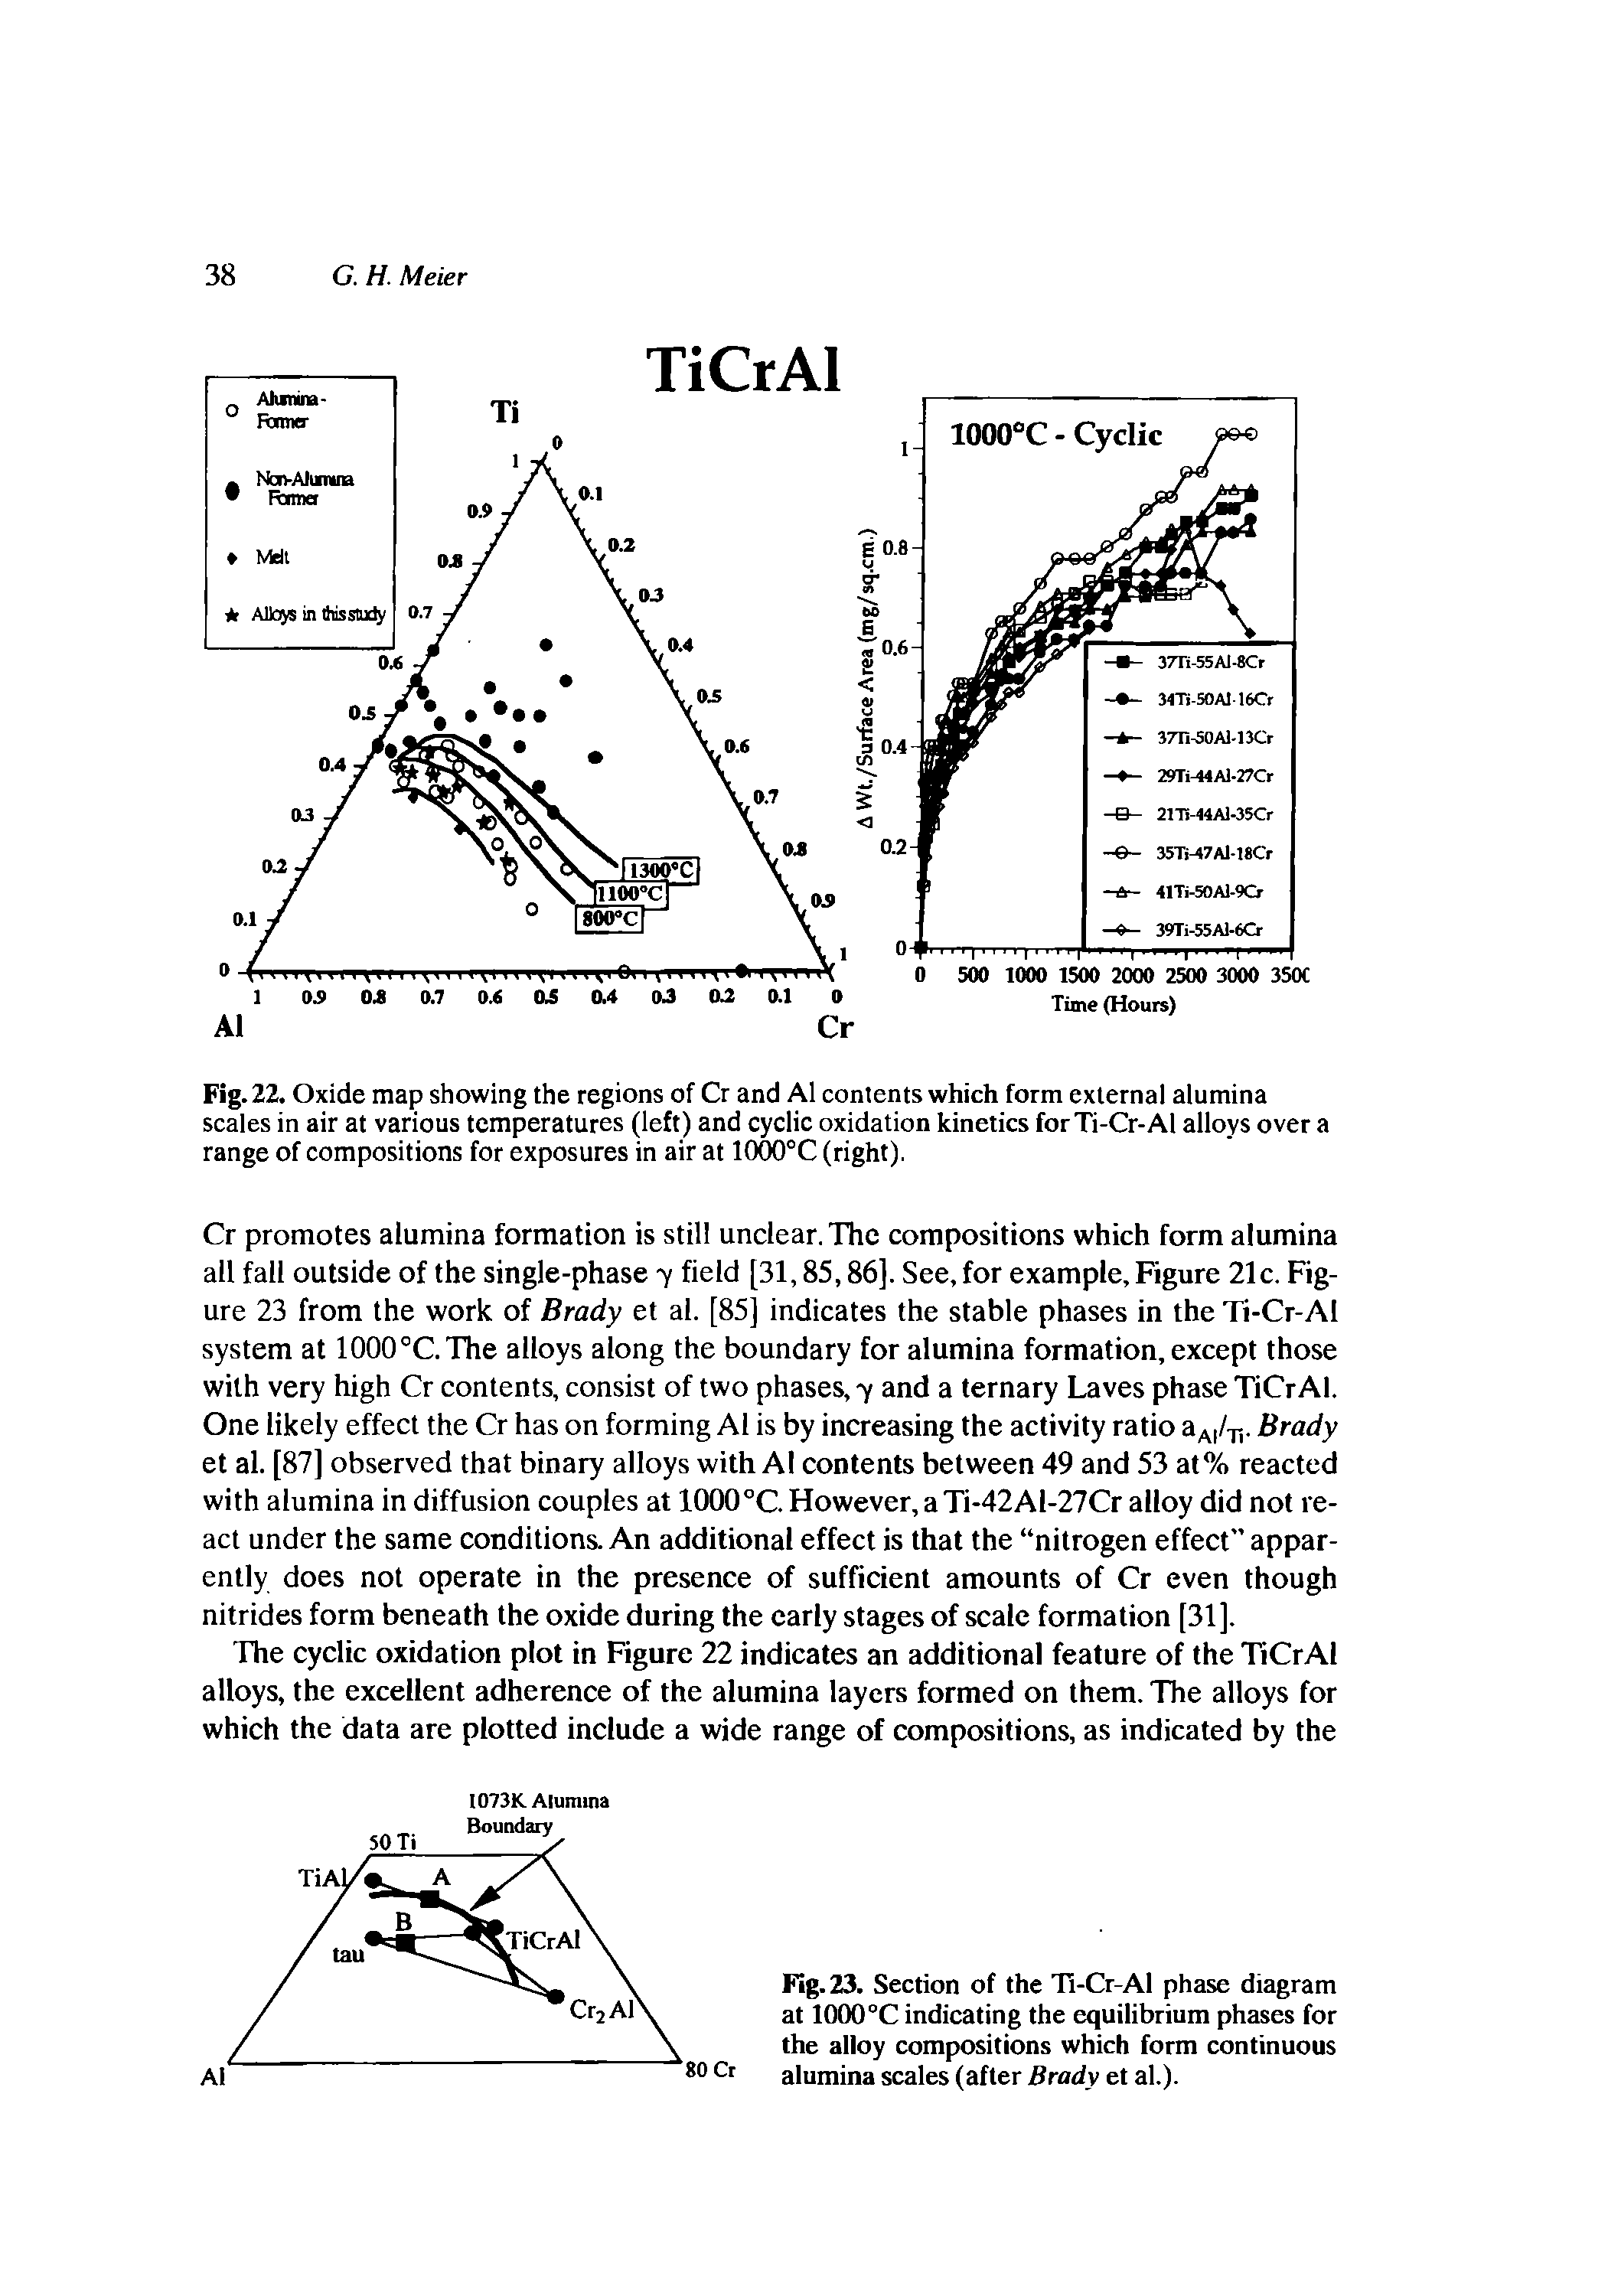 Fig. 23. Section of the Ti-Cr-Al phase diagram at 1000°C indicating the equilibrium phases for the alloy compositions which form continuous alumina scales (after Brady et al.).